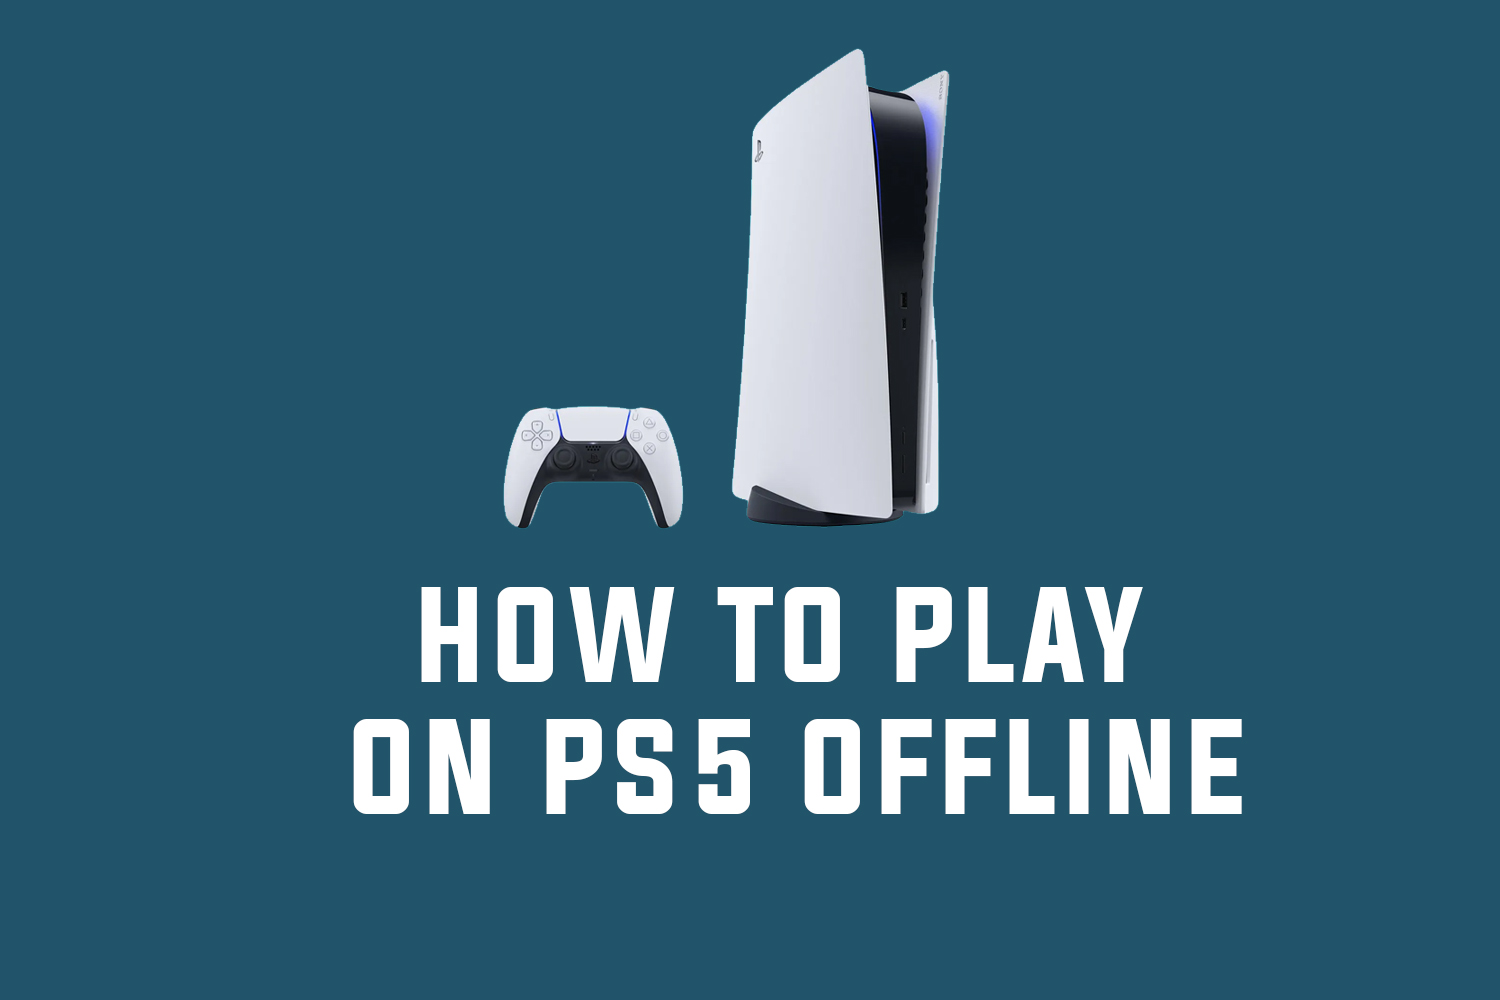 How to Play On PS5 Offline